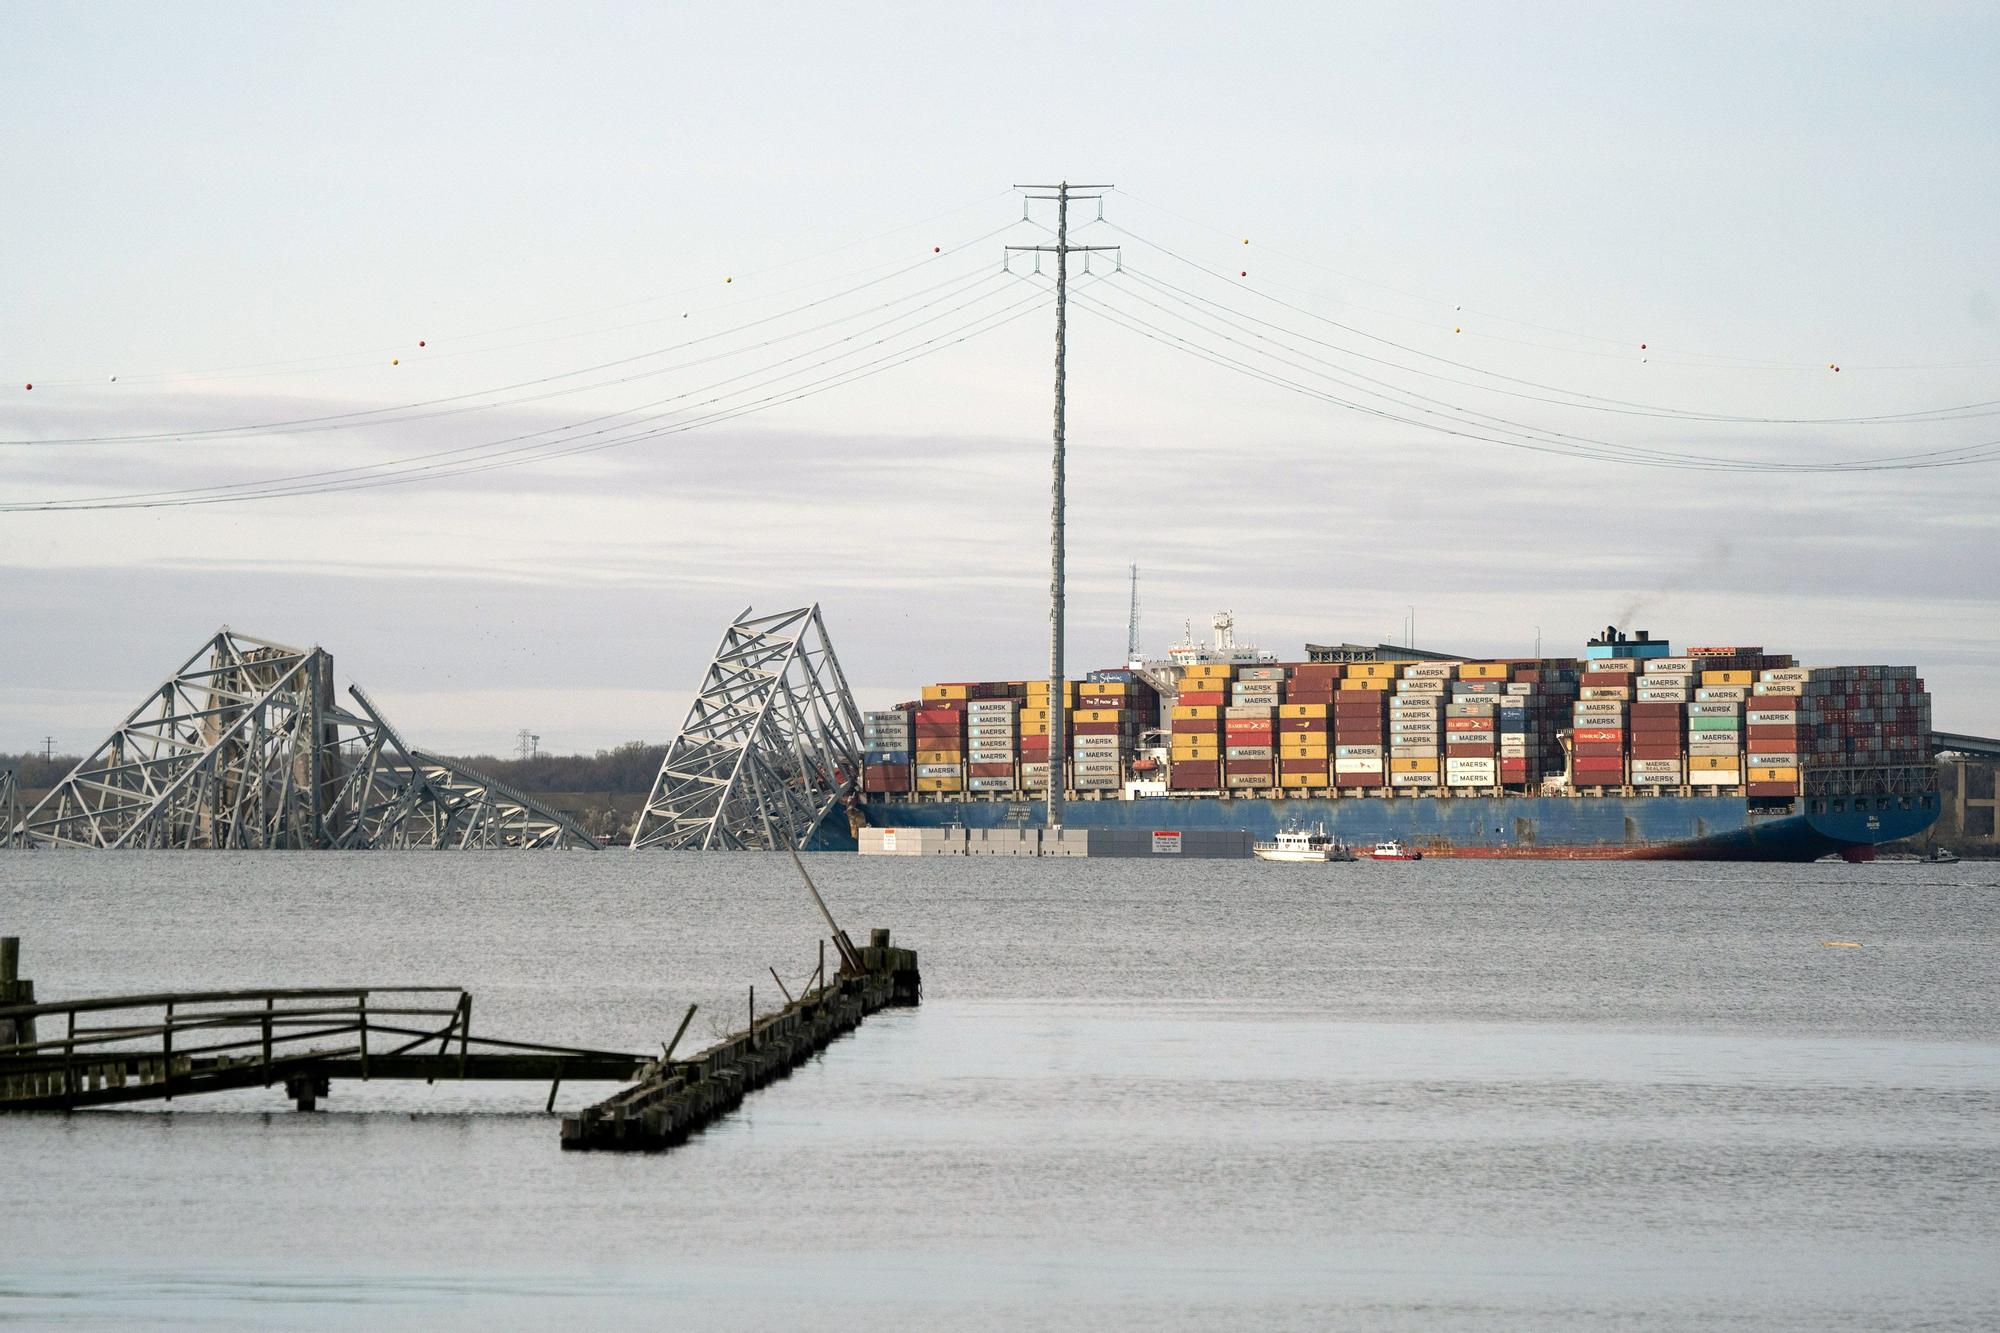 Baltimore bridge collapses after being hit by cargo ship